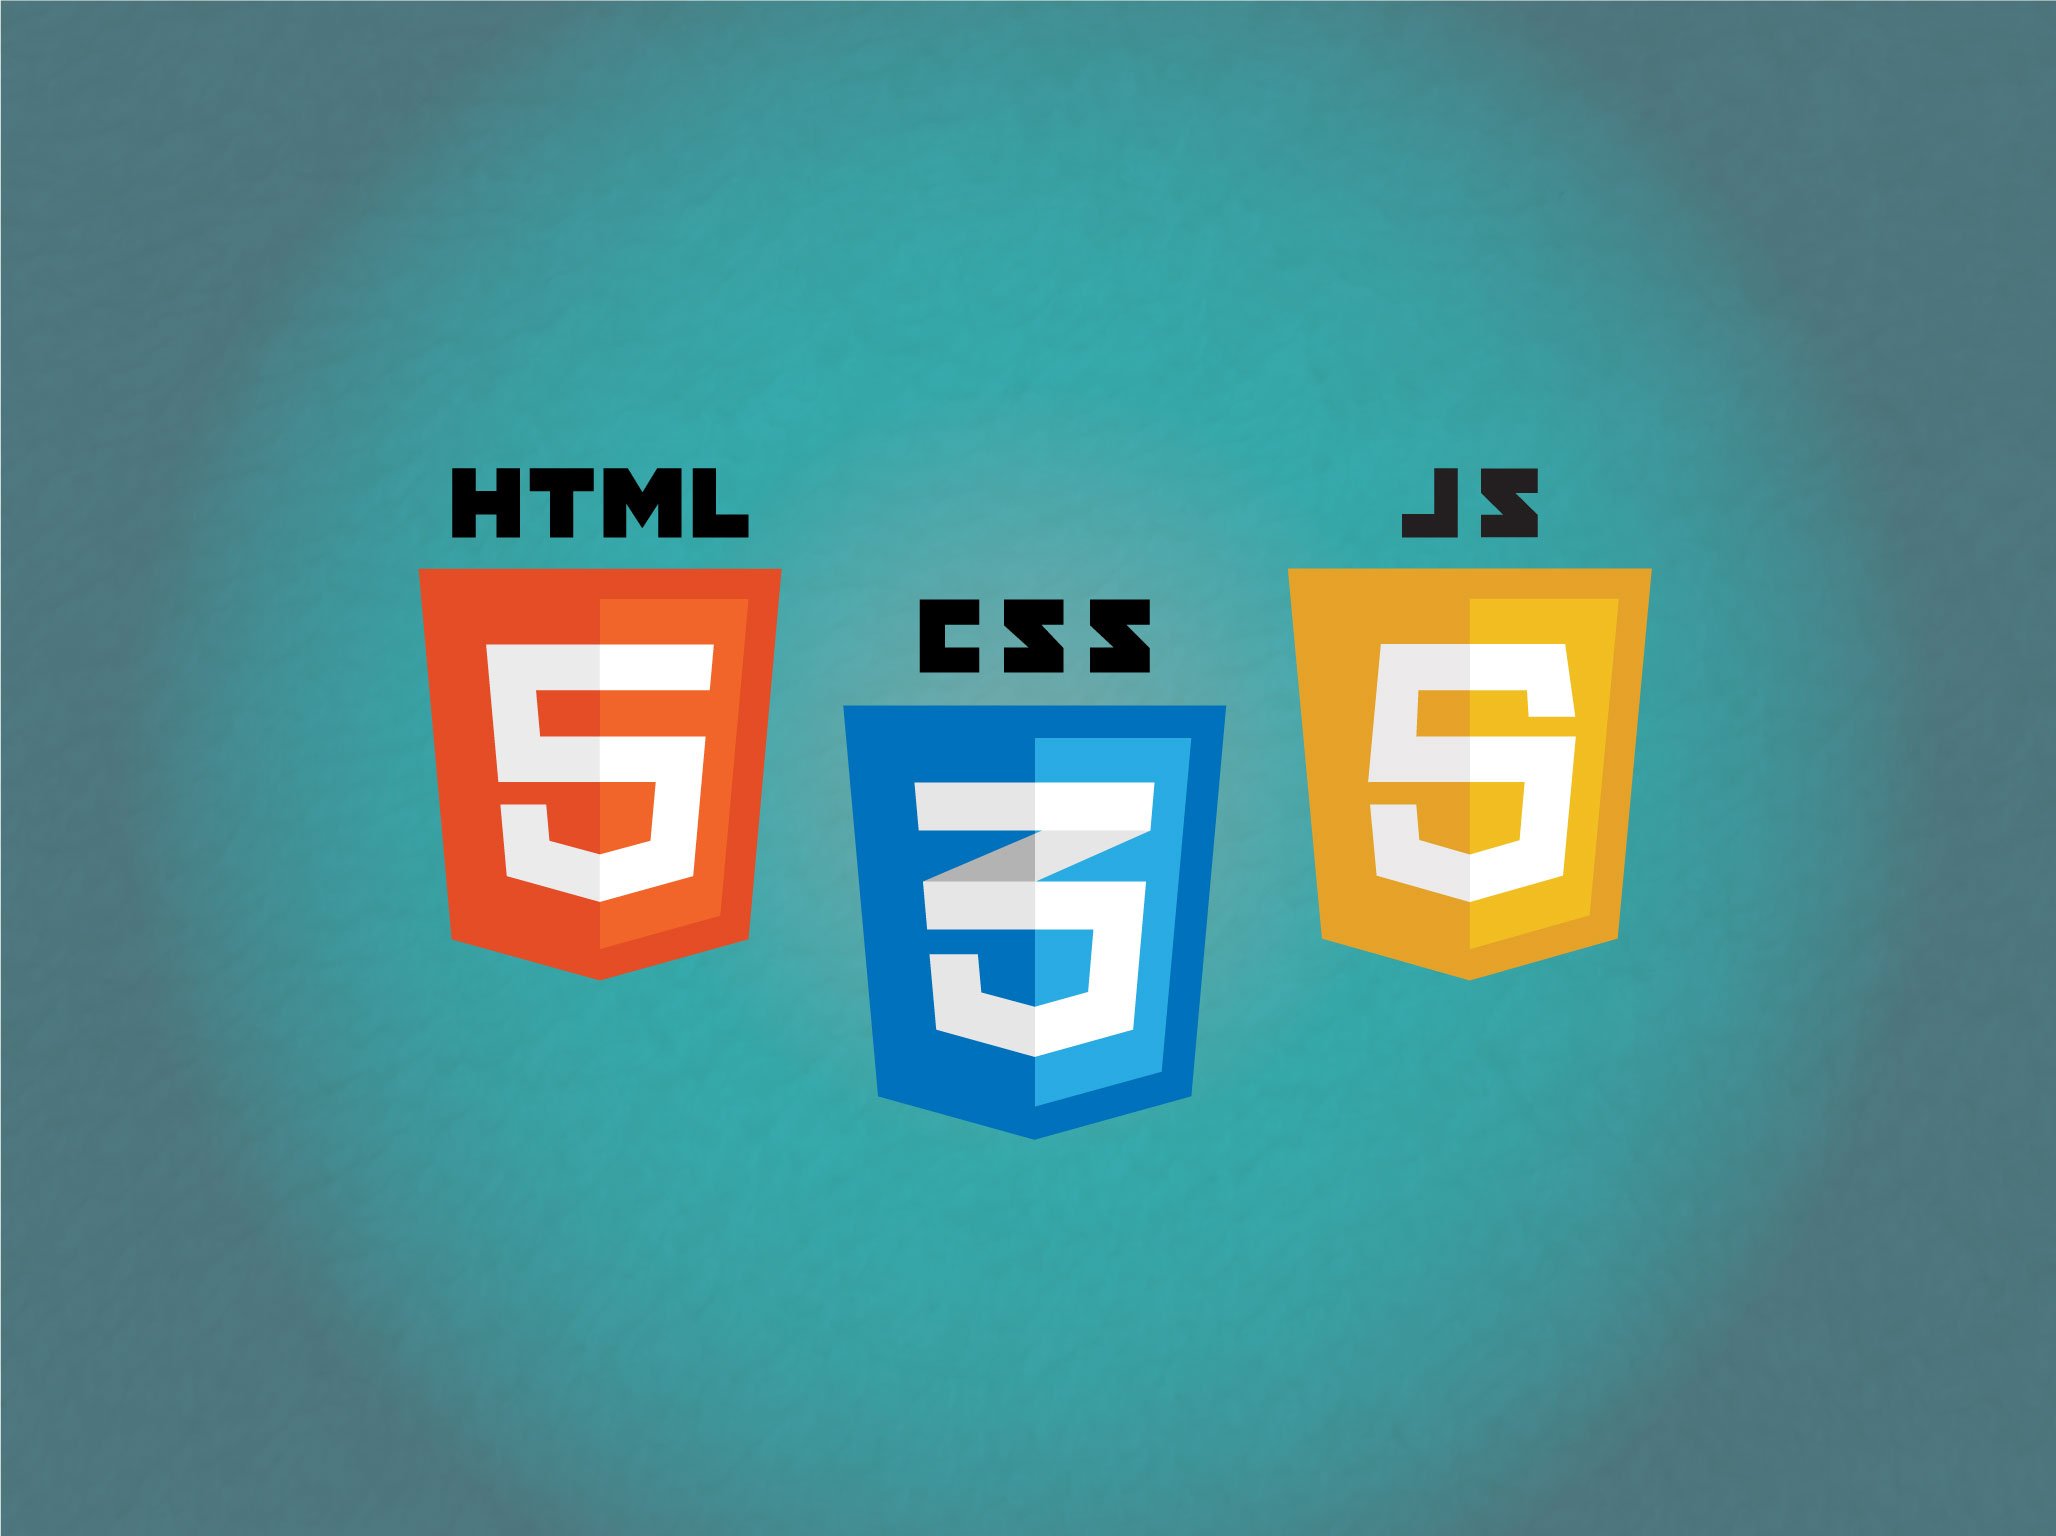 The complete Boot camp: HTML 5 CSS 3 and JavaScript